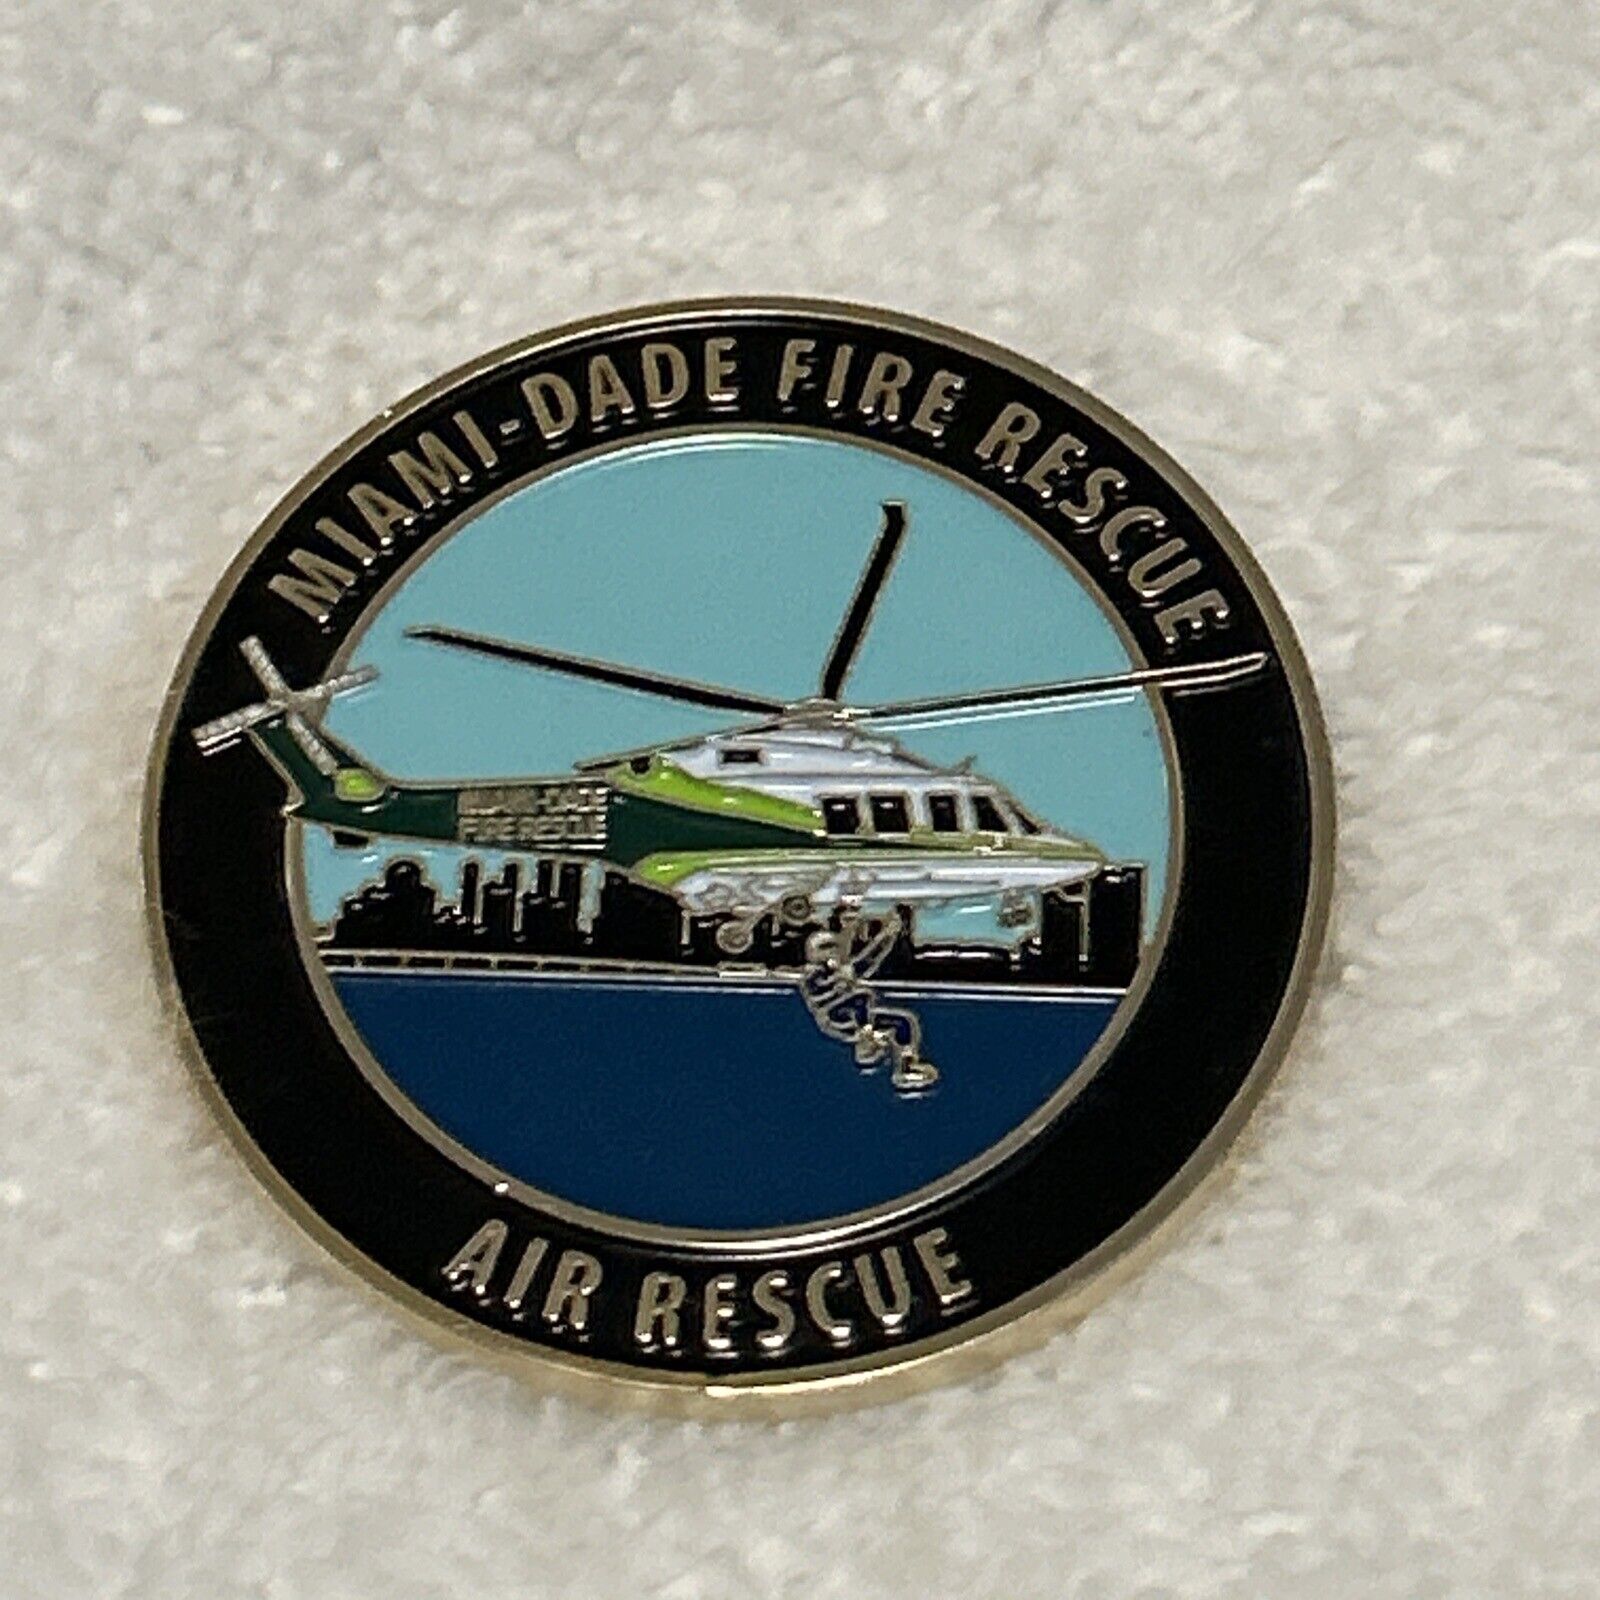 Miami Dade Fire Rescue “Air Rescue “ Helicopter Challenge Coin